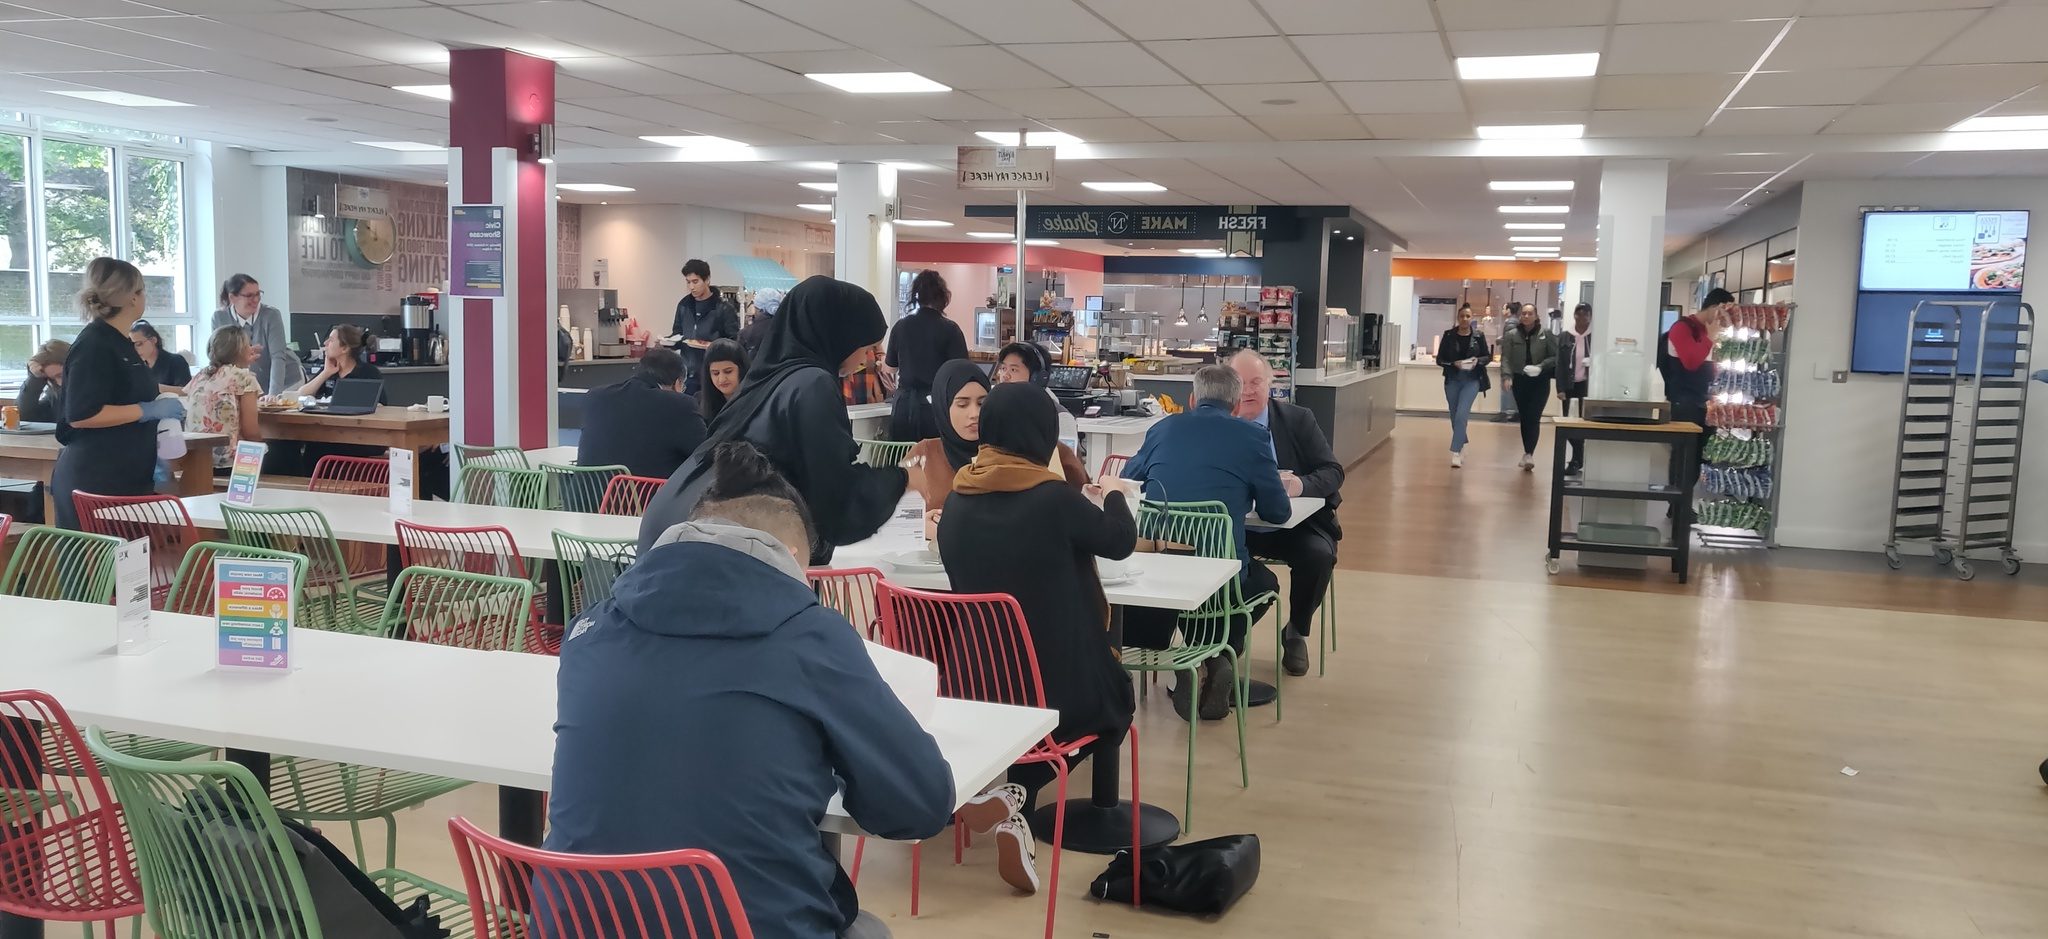 Kingston University canteen is among the cheapest in London